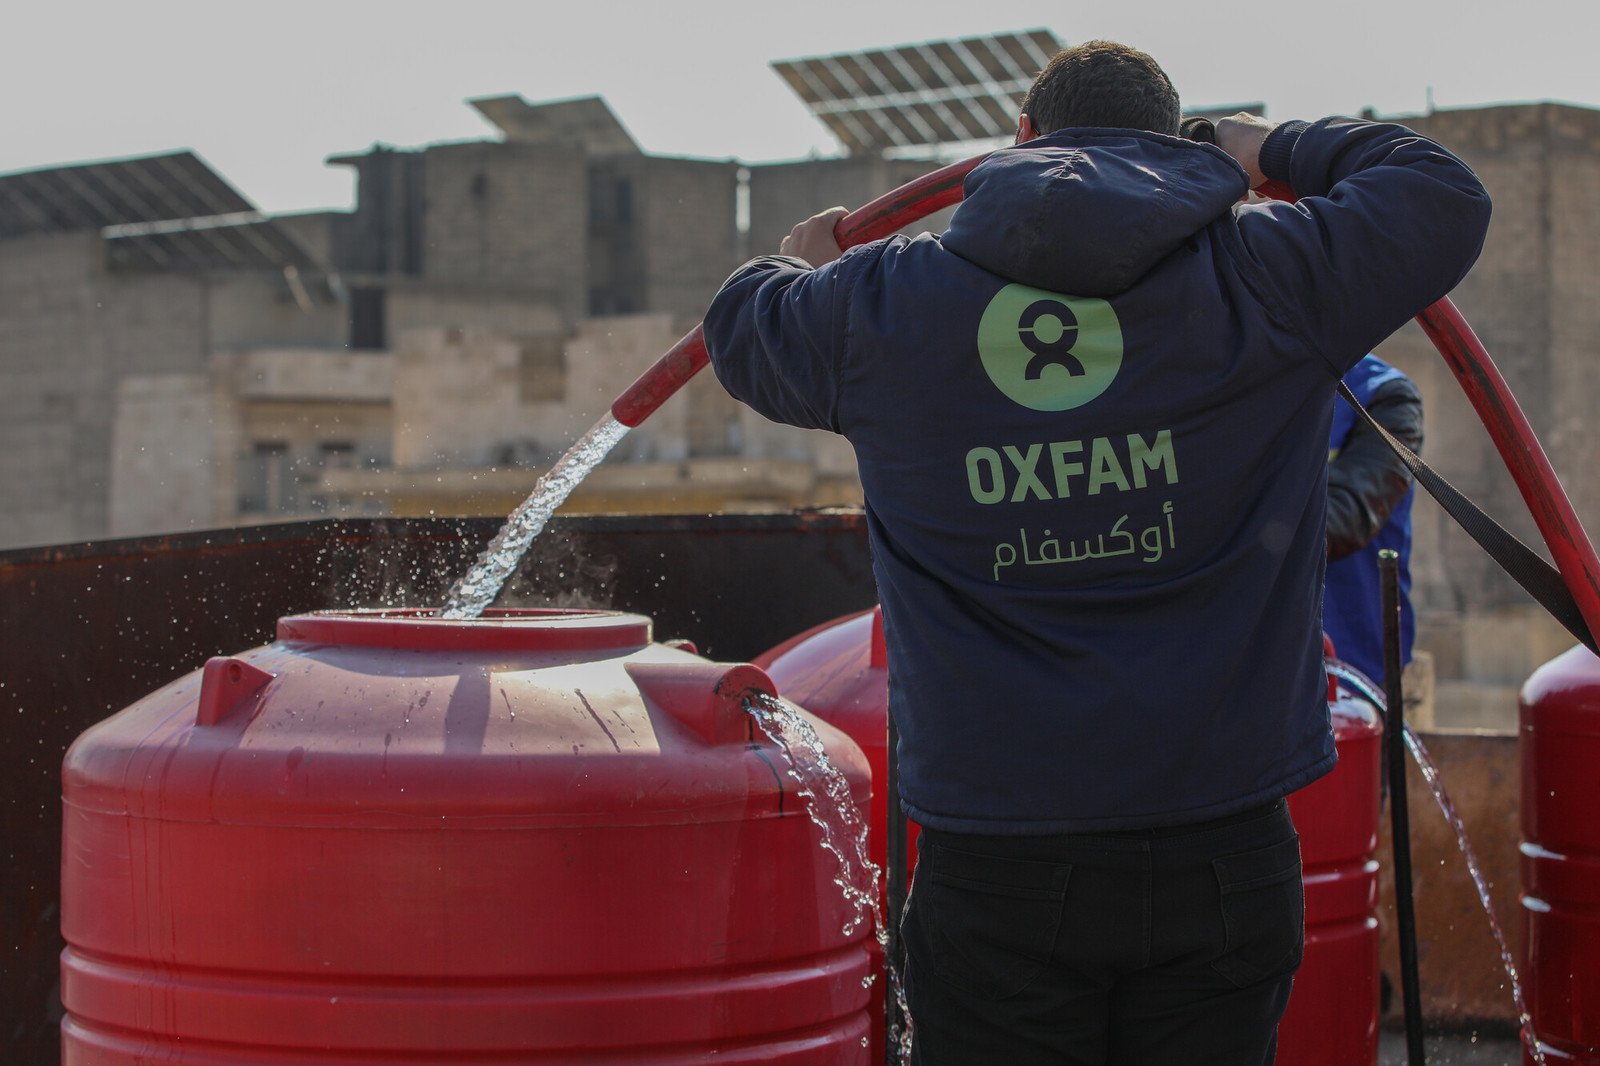 Oxfam delivering water to shelters in Aleppo city.